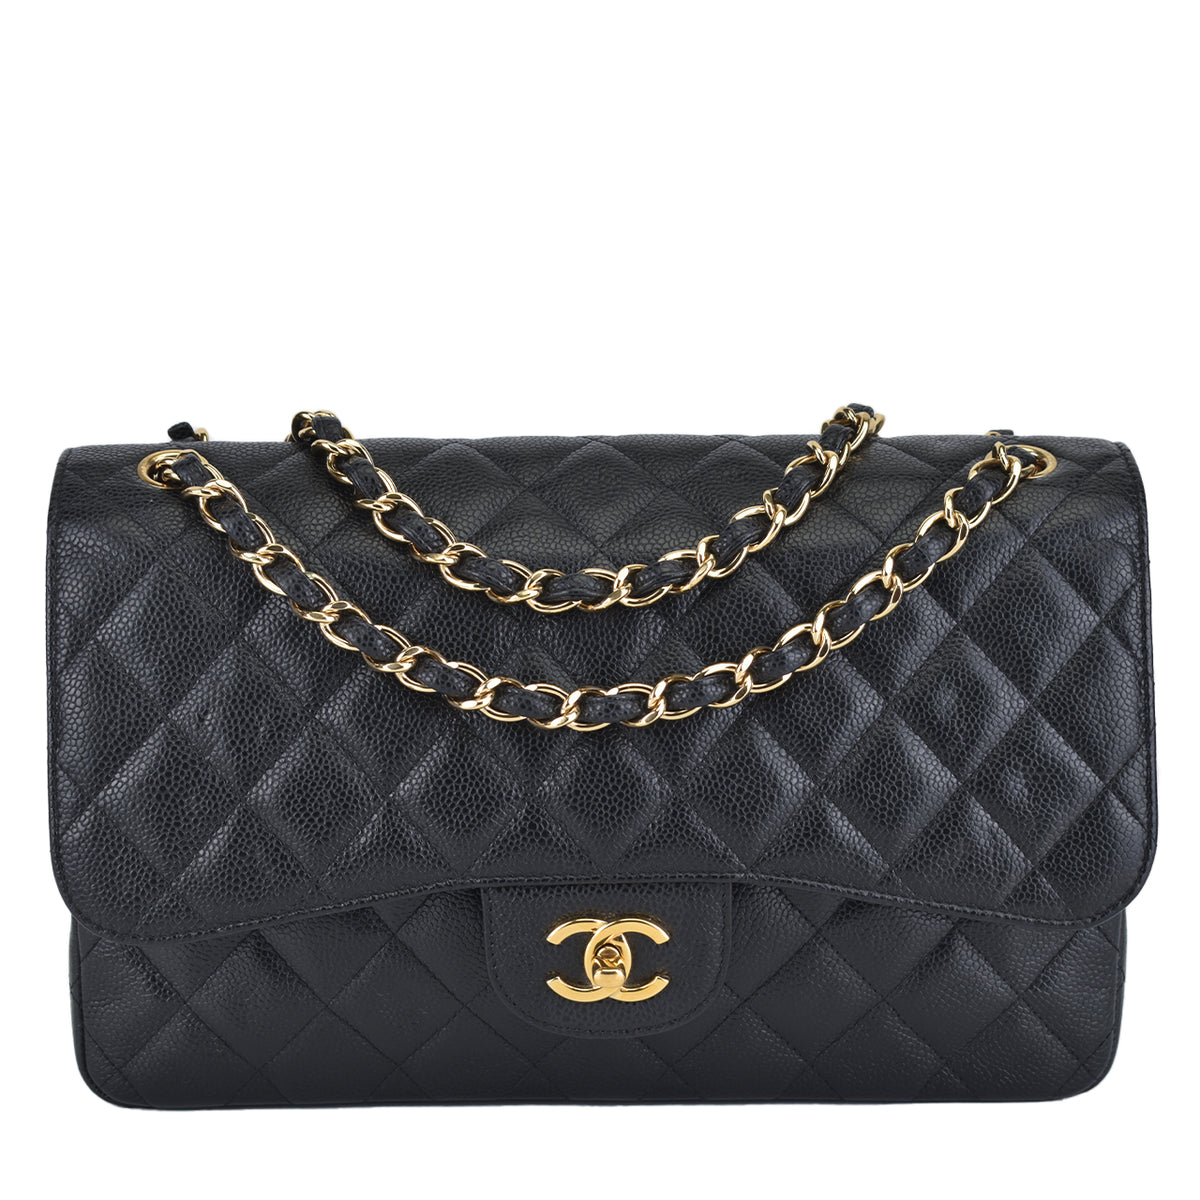 Chanel Small Melody black grained calfskin gold hardware